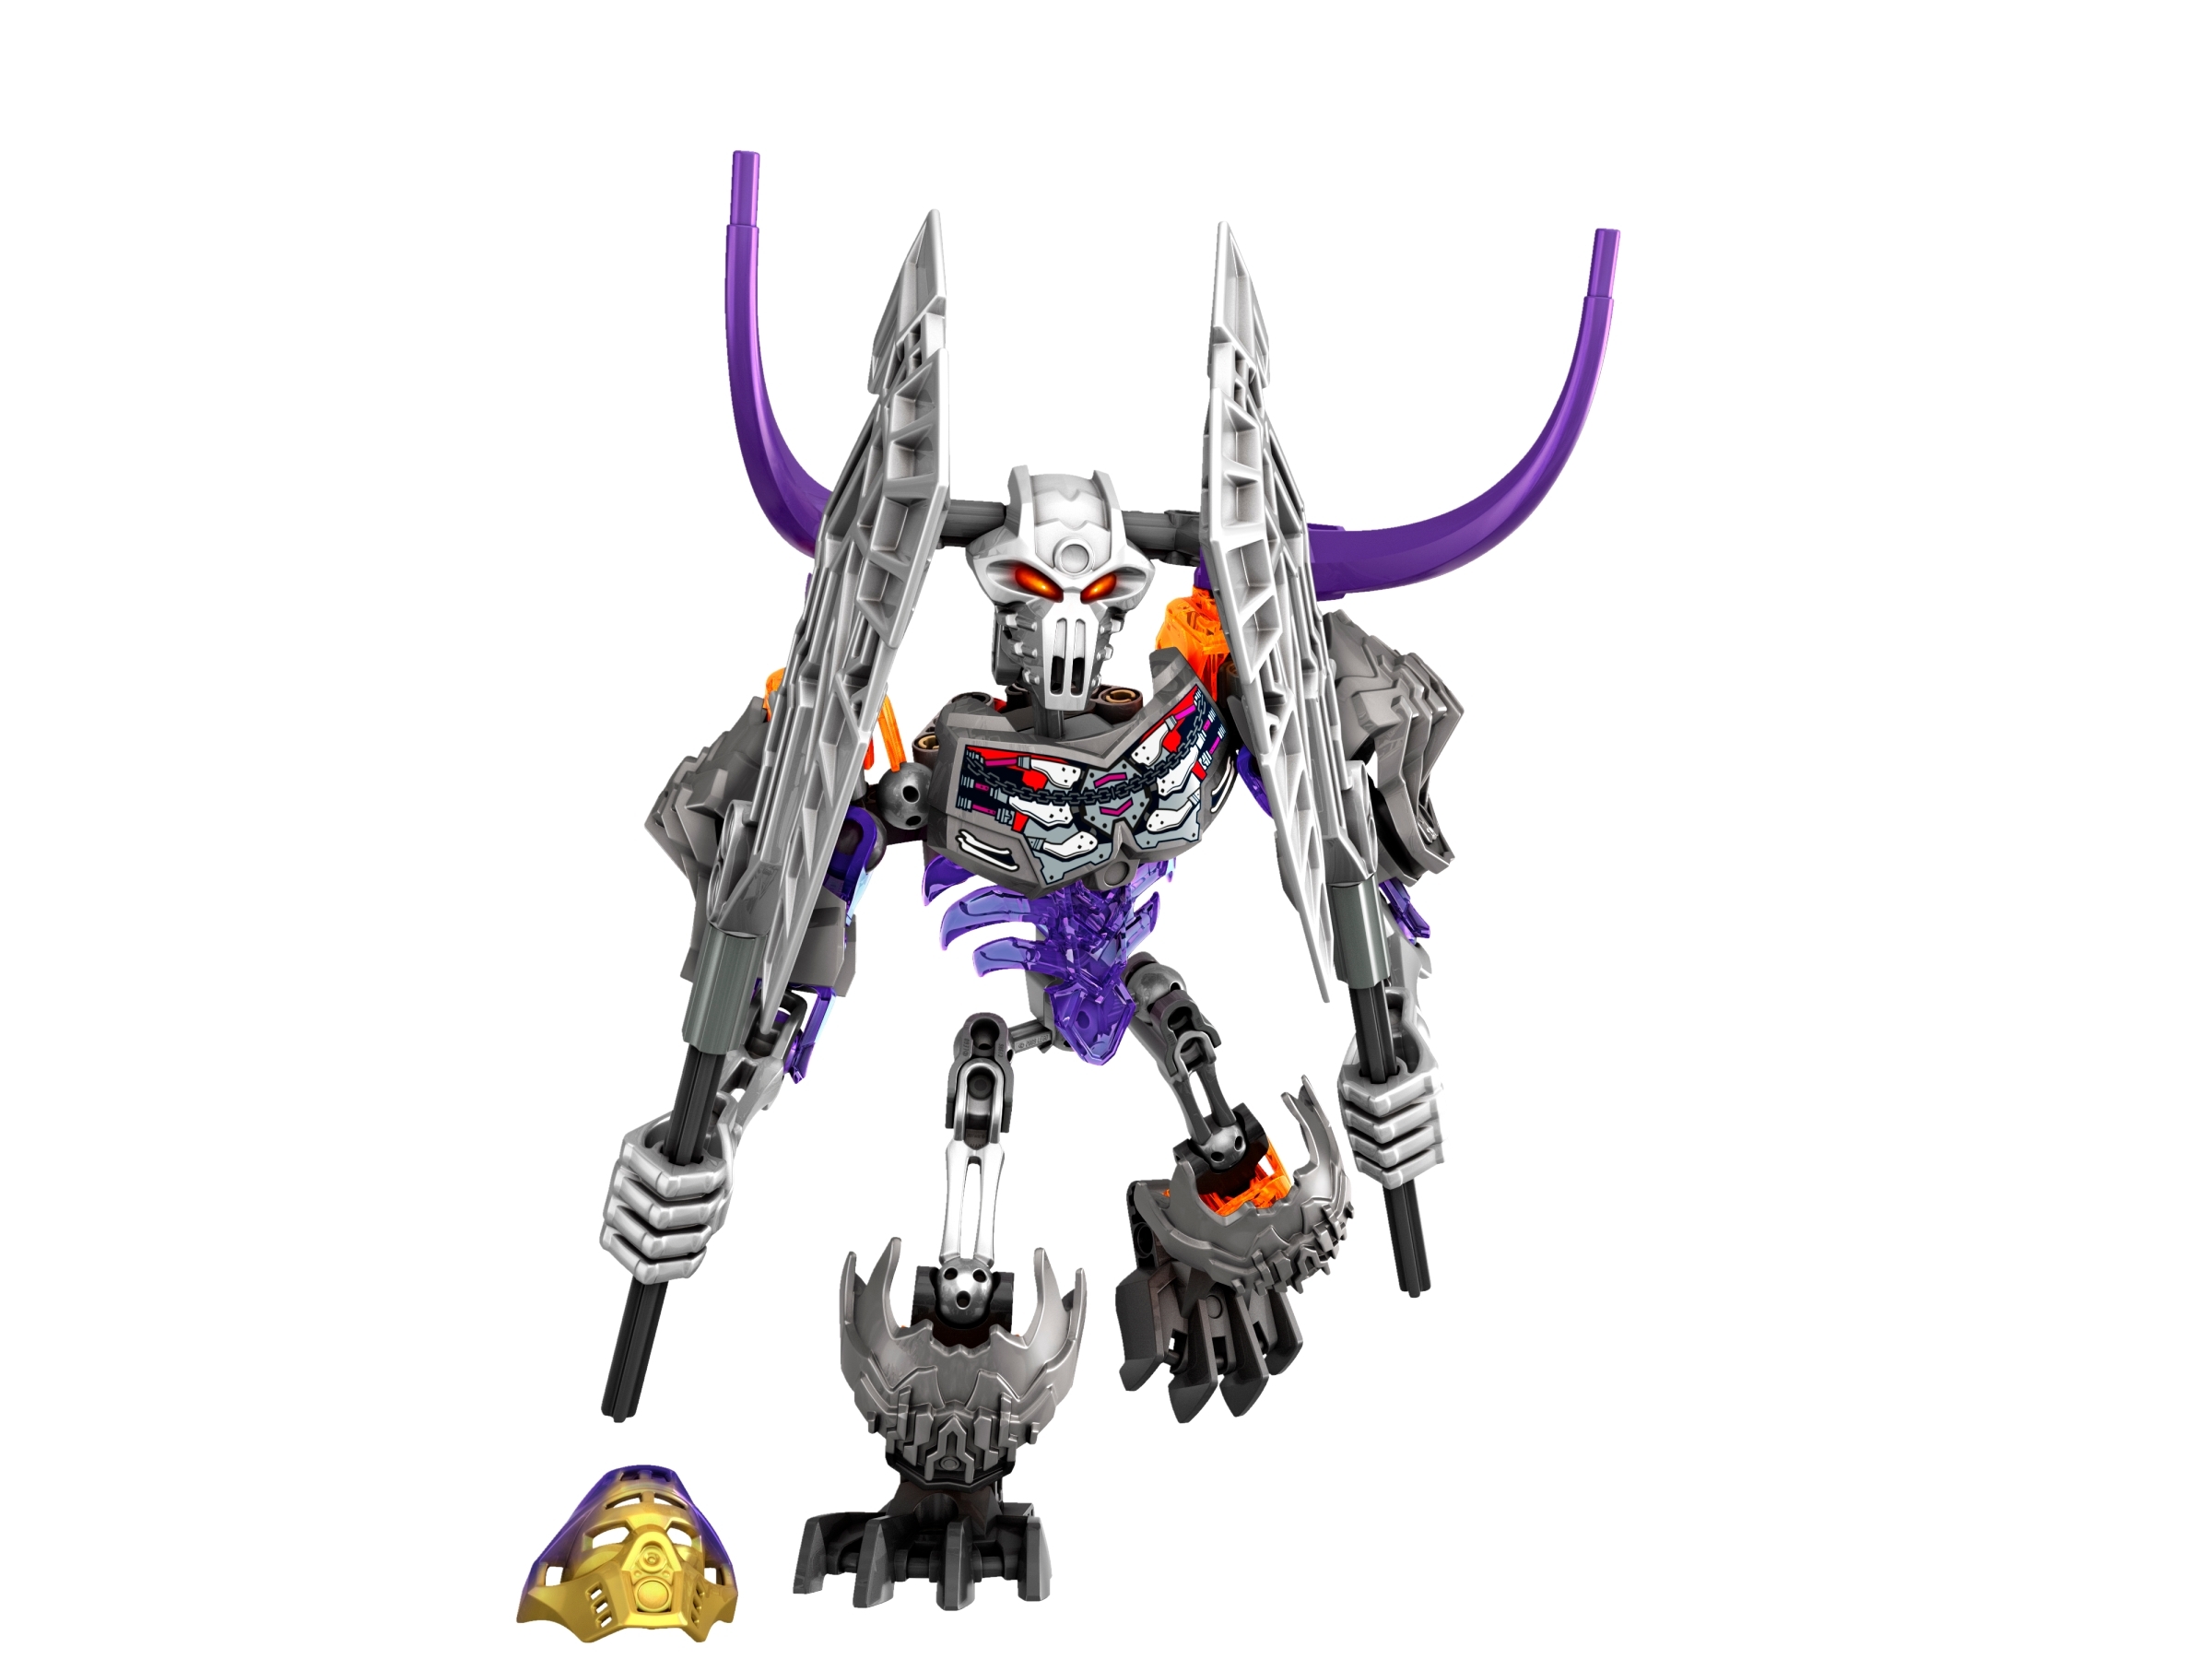 Skull Basher 70793 Bionicle Buy Online At The Official Lego